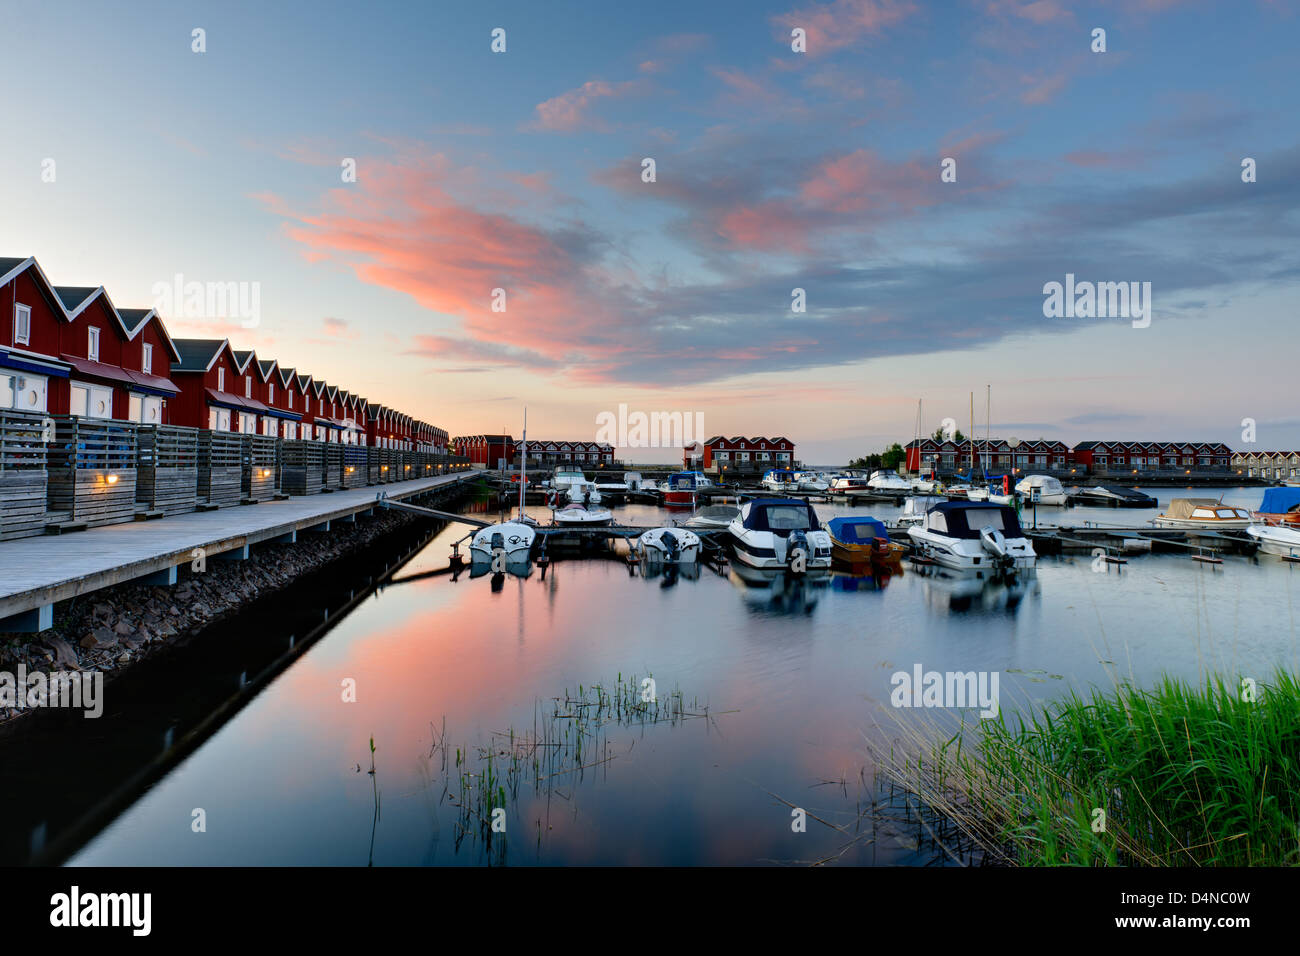 Sunset over sea cottages and waterfront, Mellerud, Sweden, Europe Stock Photo